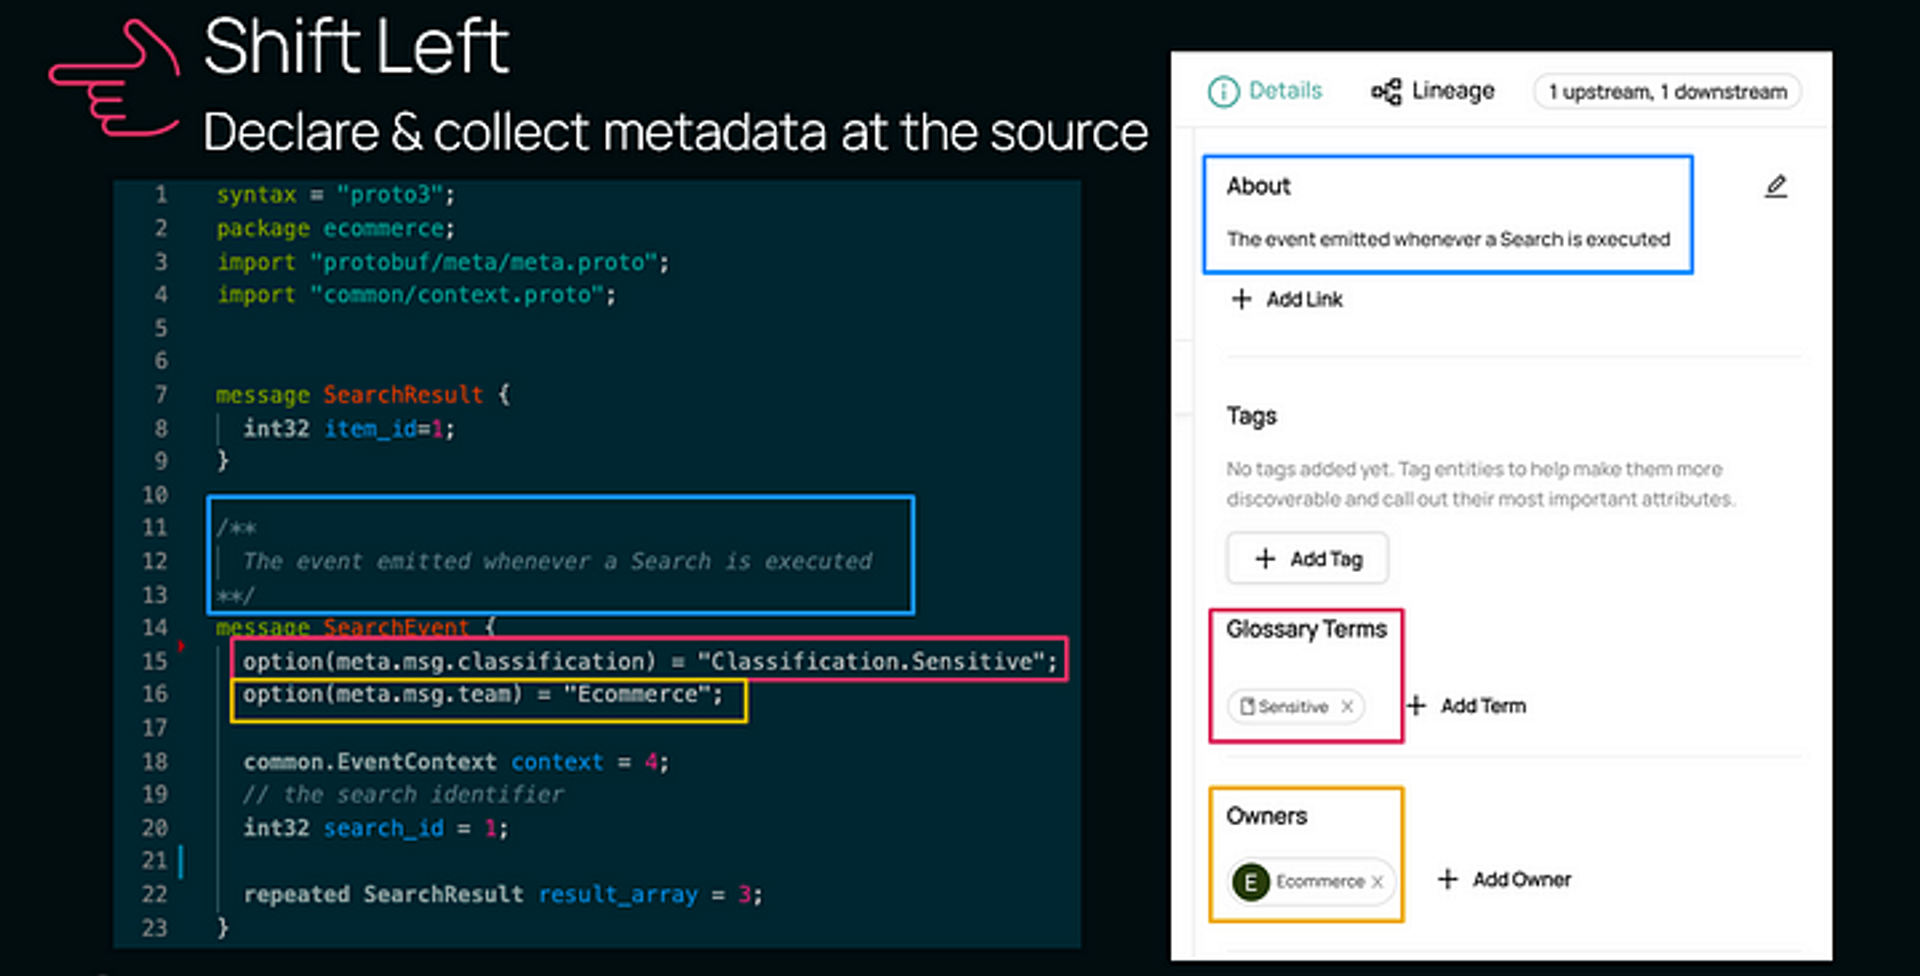 Shift Left: declare & collect metadata at the source